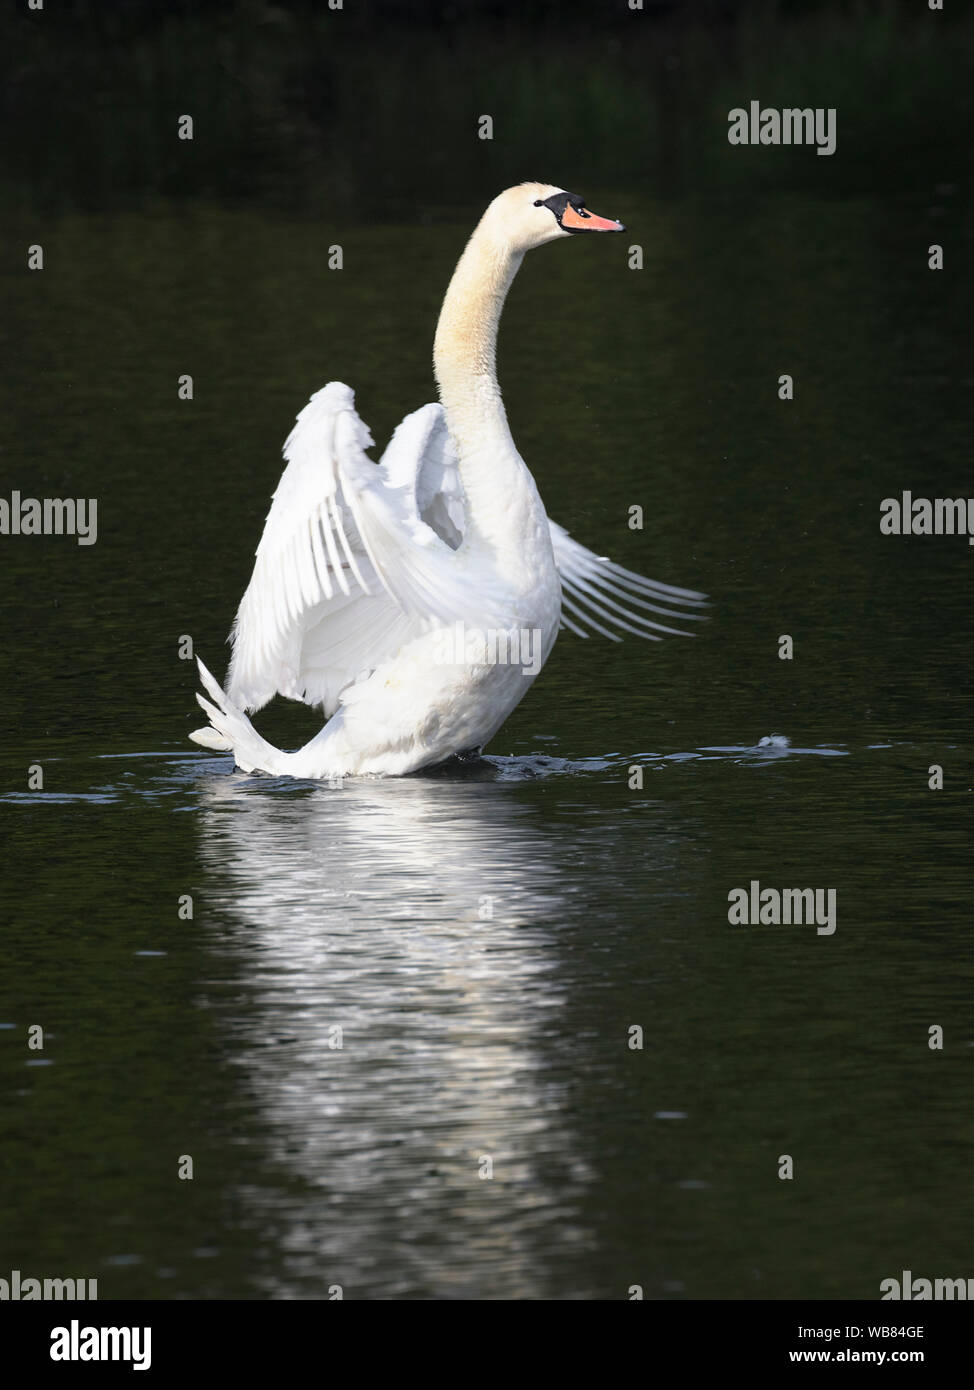 Adult Mute Swan (Cygnus olor) flapping its wings during preening Stock Photo